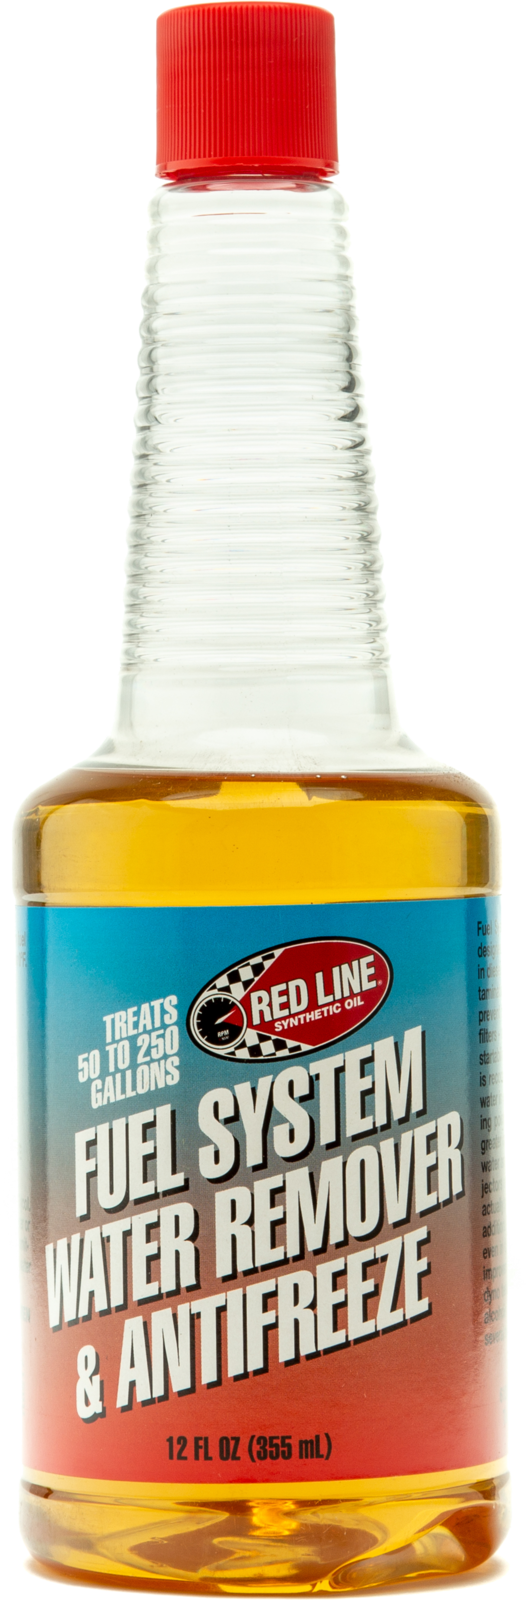 Fuel System Water Remover & Antifreeze